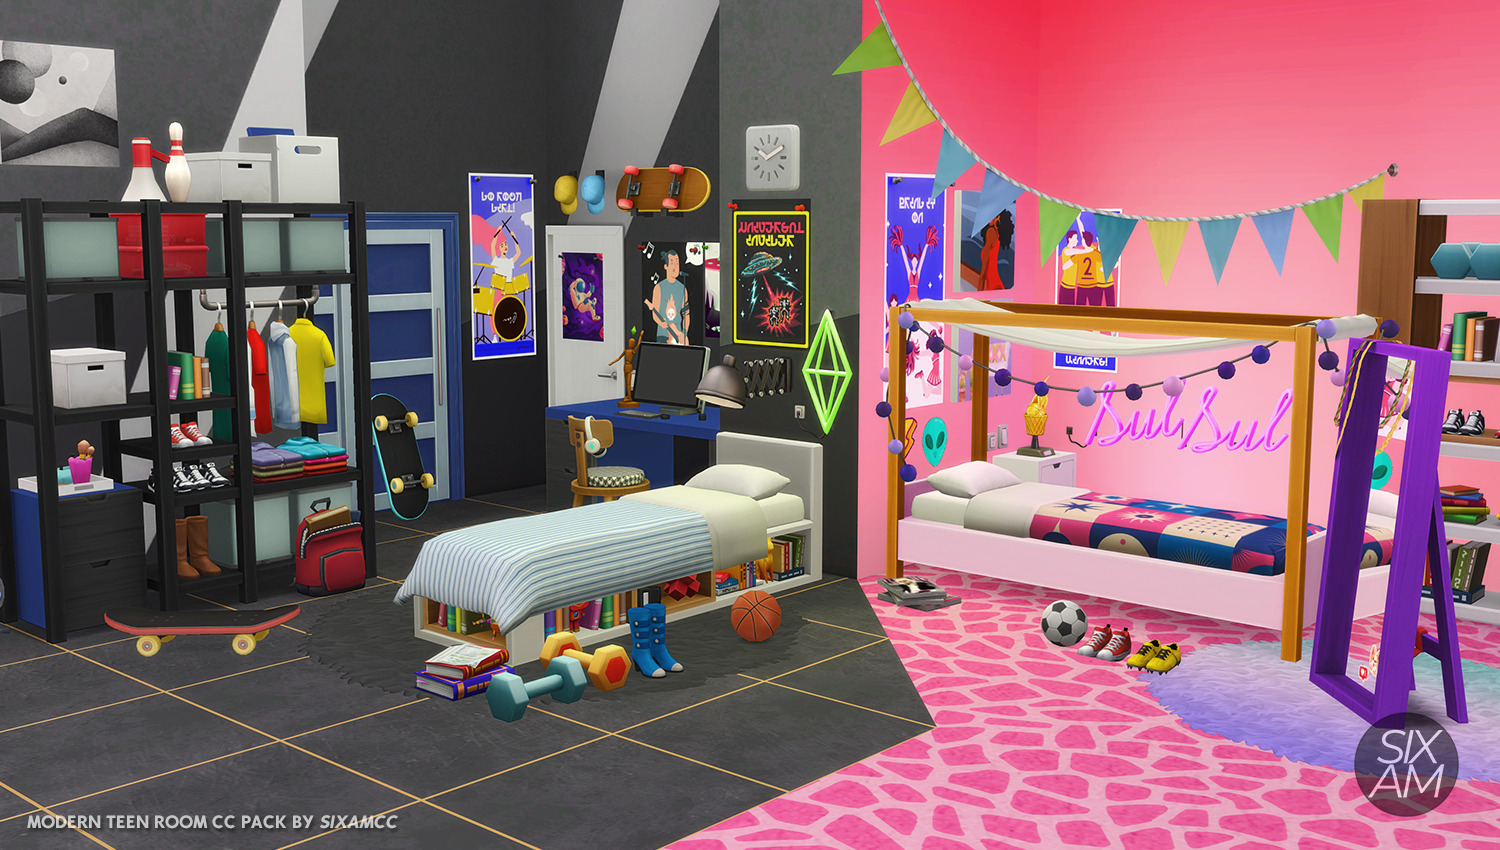 Modern Teen Bedroom Cc Pack For The Sims 4 Sixam Cc Spaceship